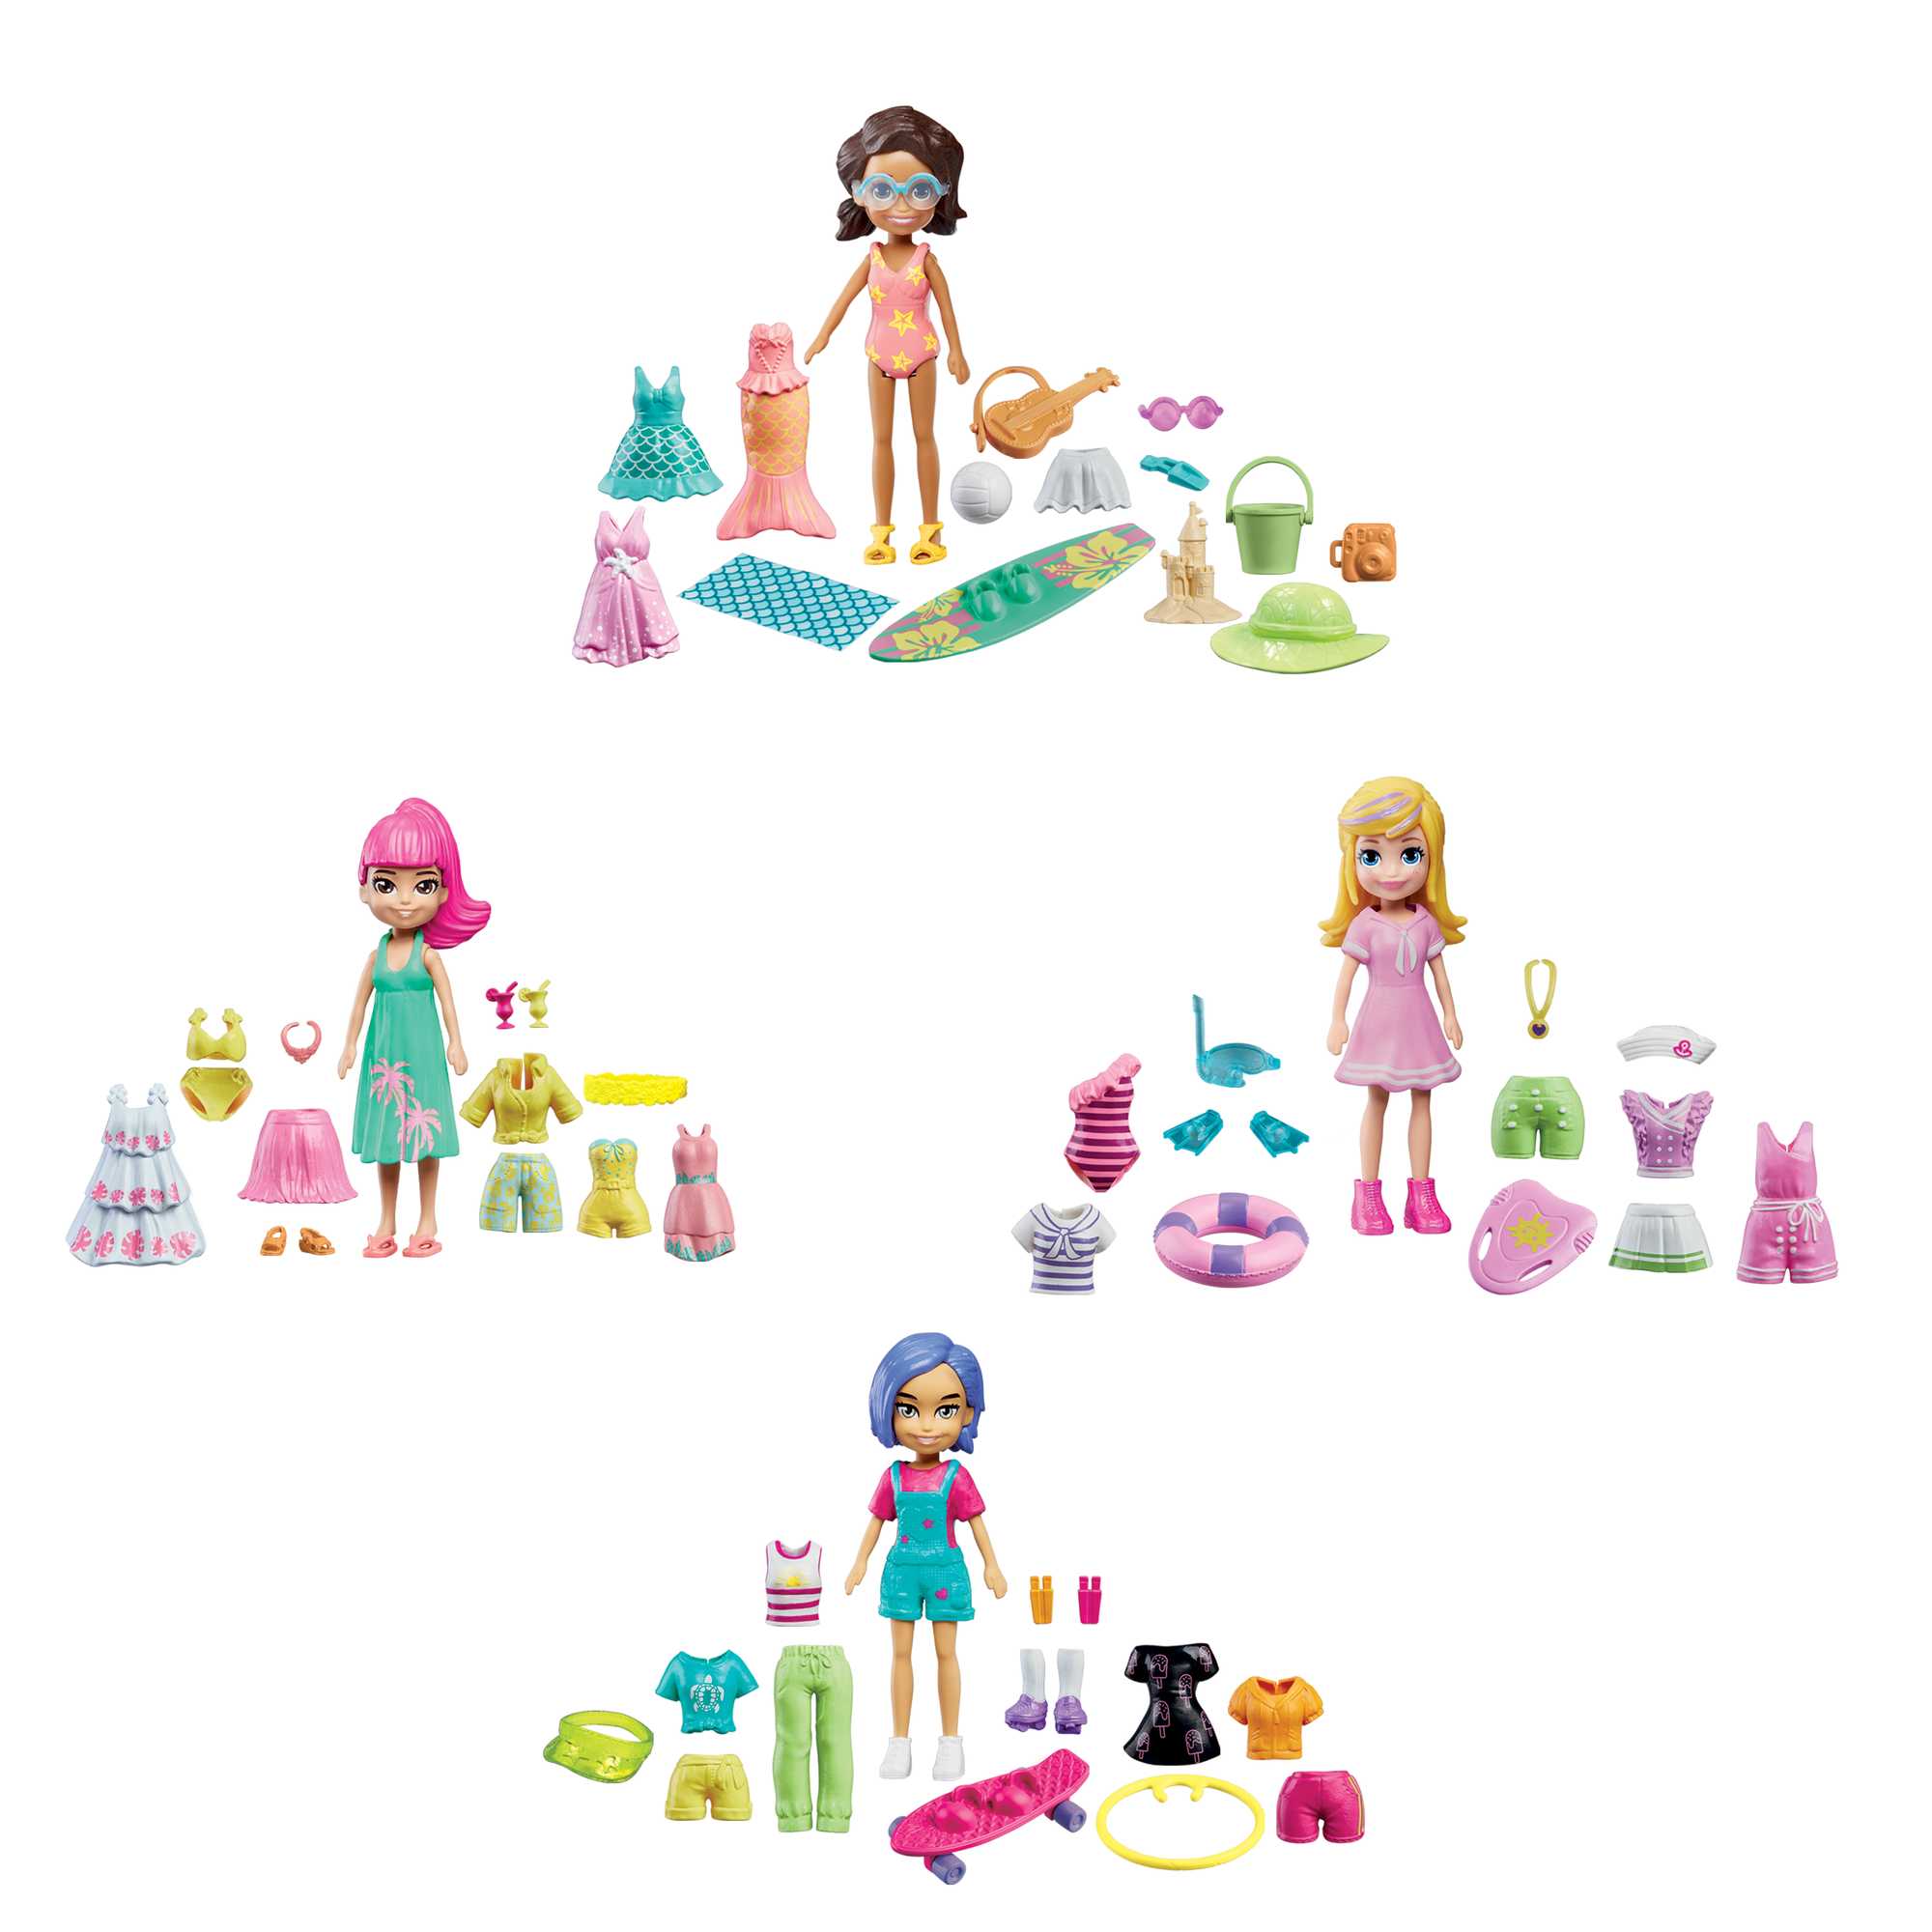 Fashion Polly! Super Stylin' Mall Polly Pockets ~ Missing Many Accessories  ;((